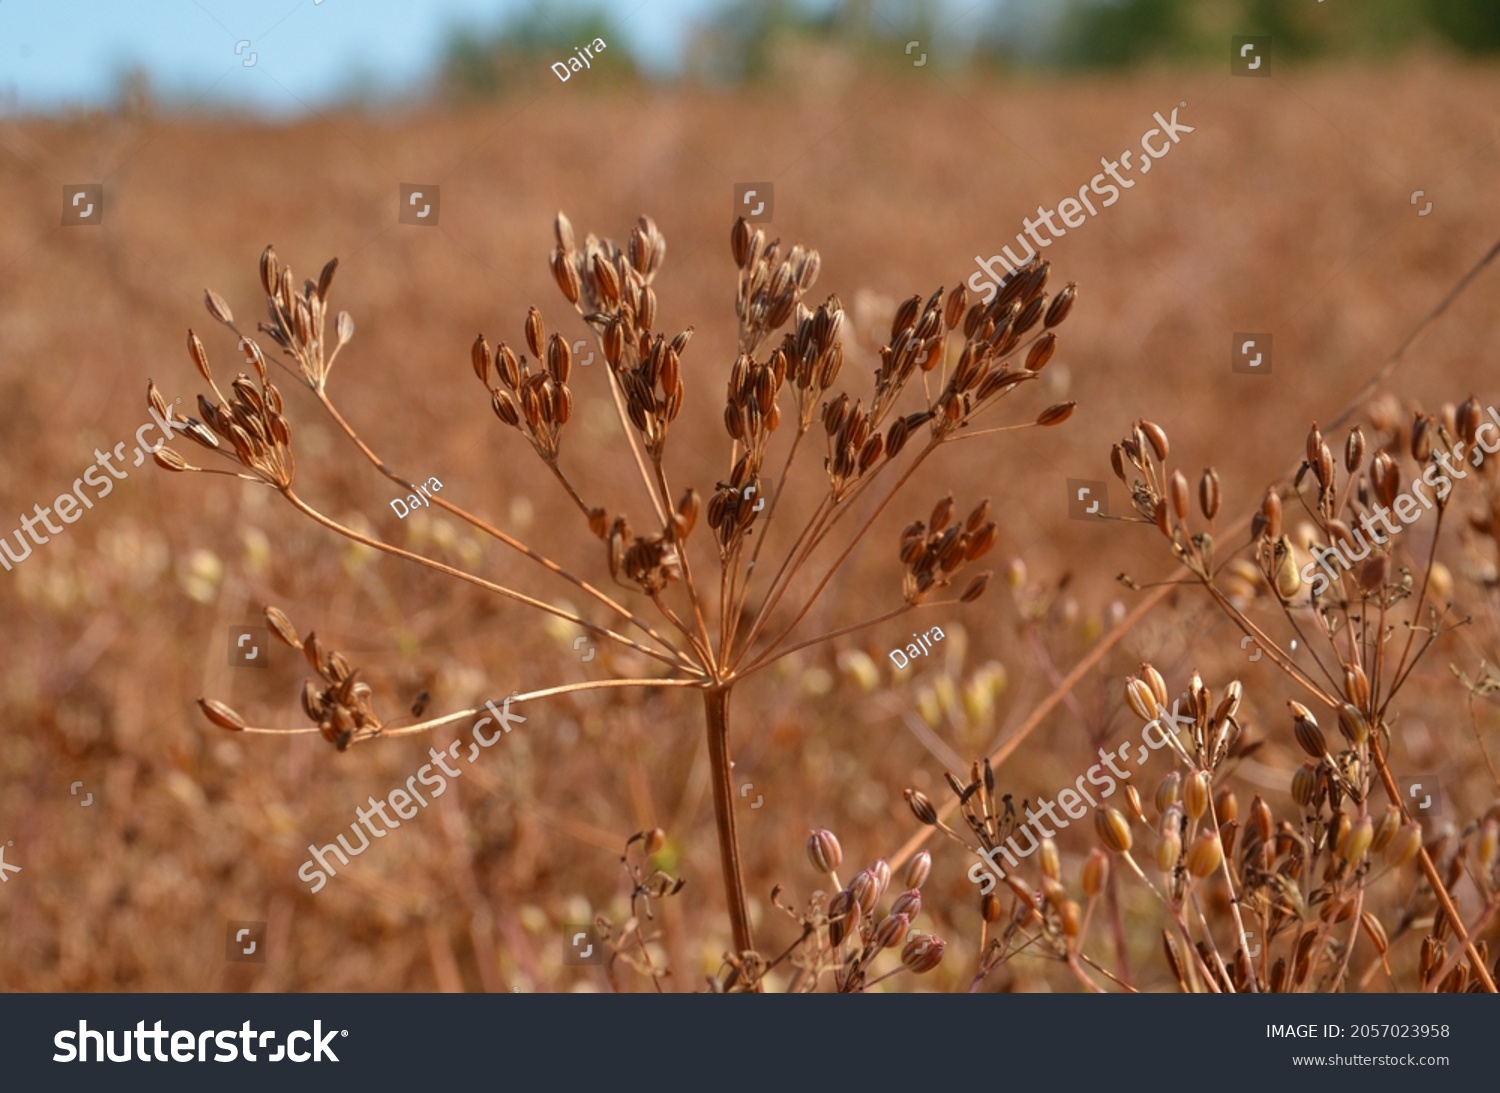 Caraway (Carum carvi) plant and seeds, fresh plant of ripe cumin on natural background. Caraway field. Ready for harvest. #2057023958